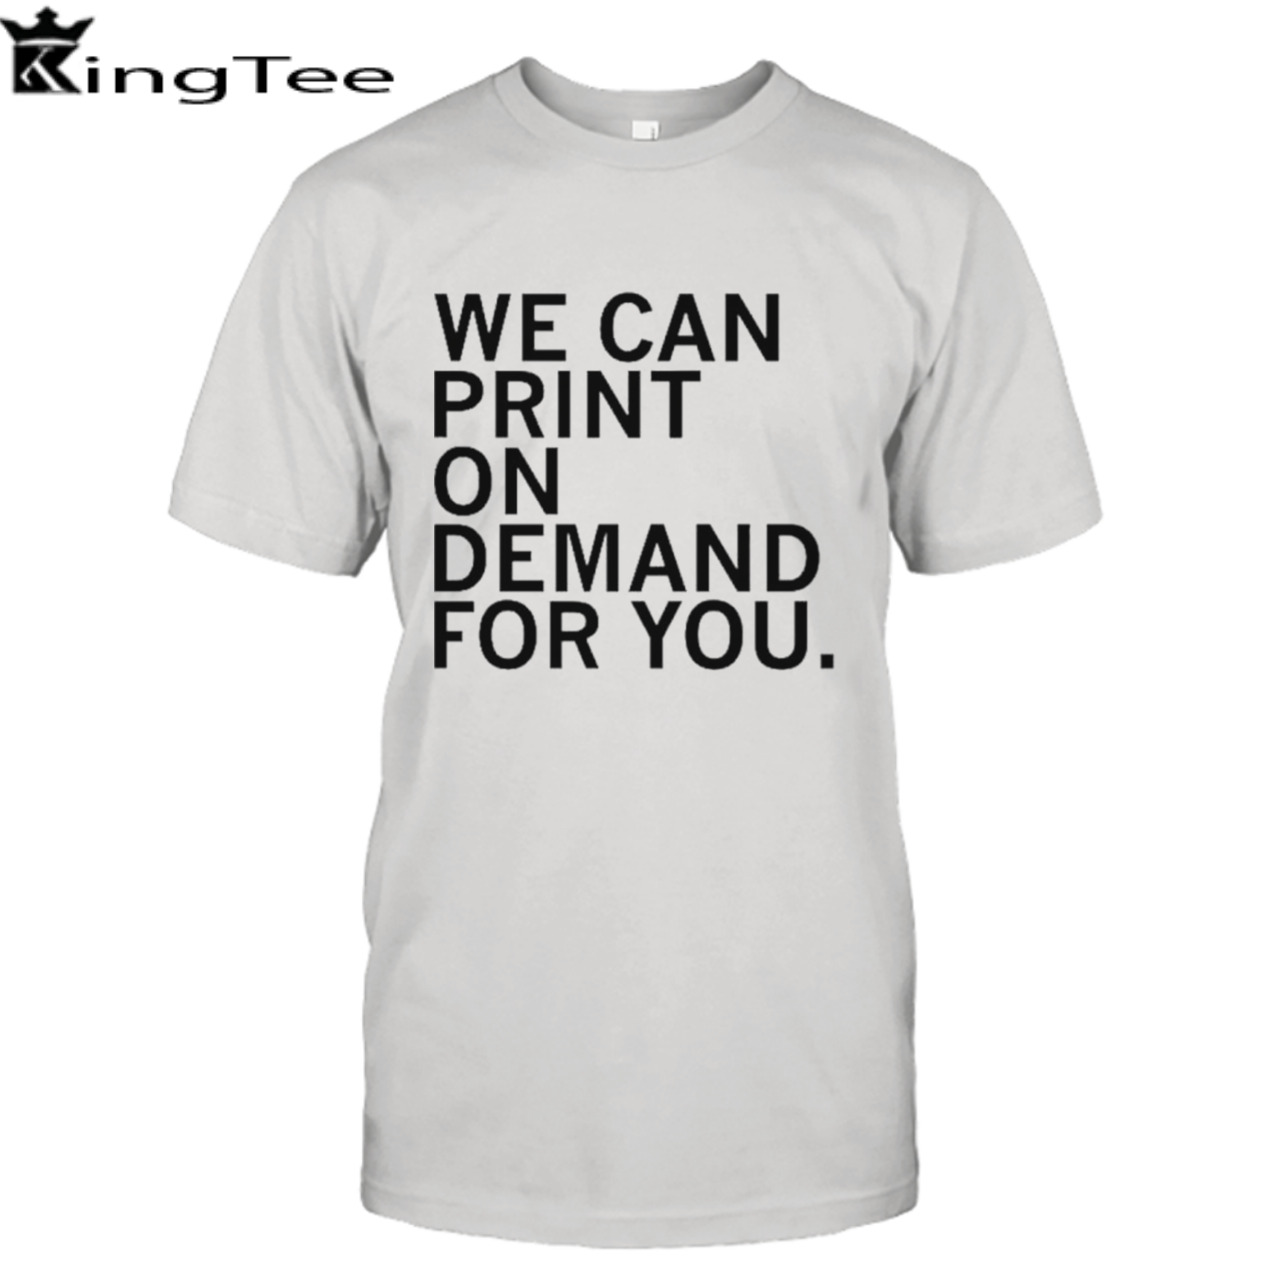 We can print on demand for you shirt